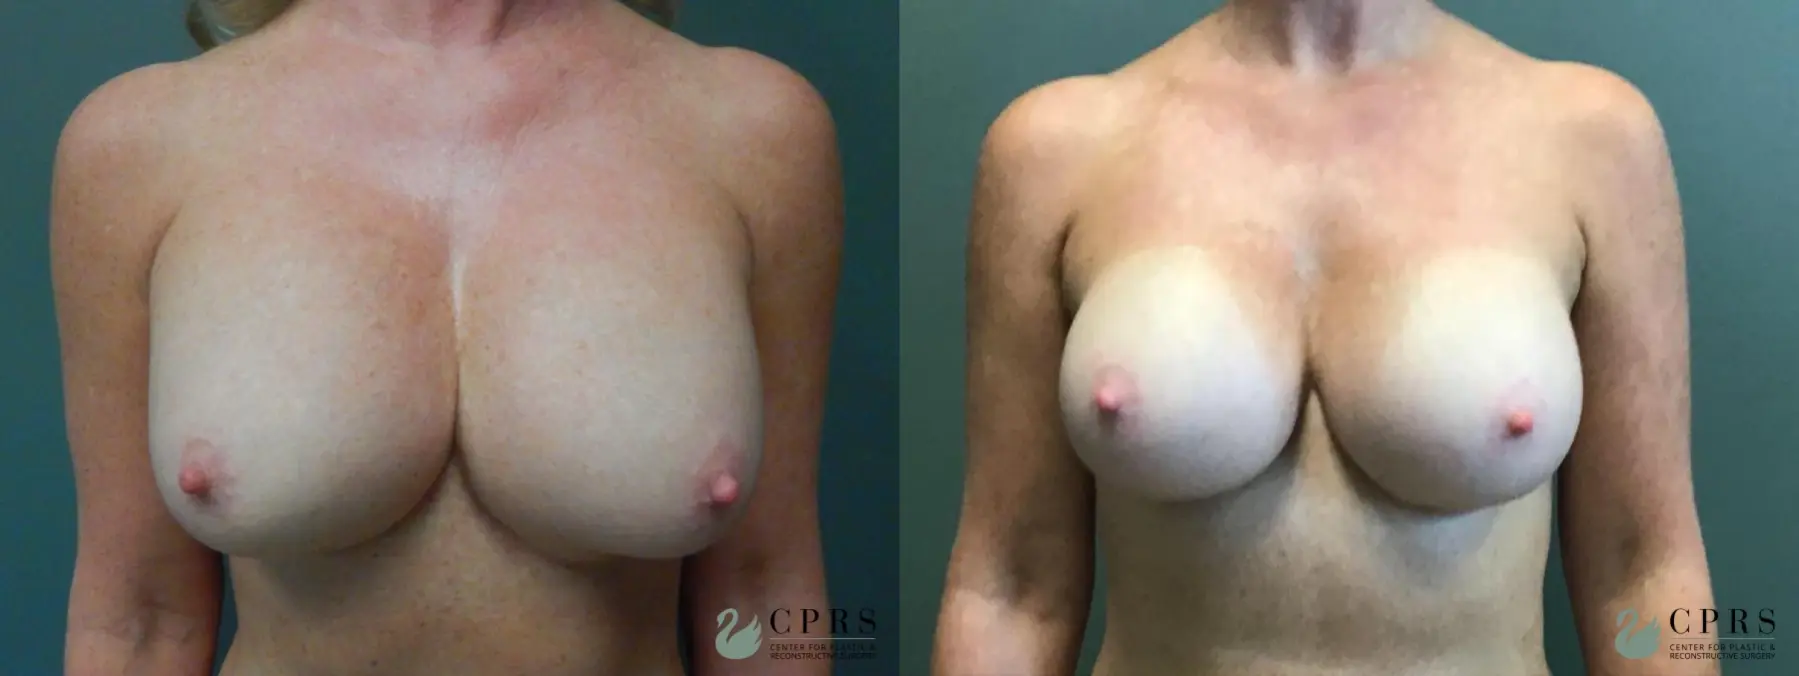 Revision Breast Augmentation : Patient 2 - Before and After 1